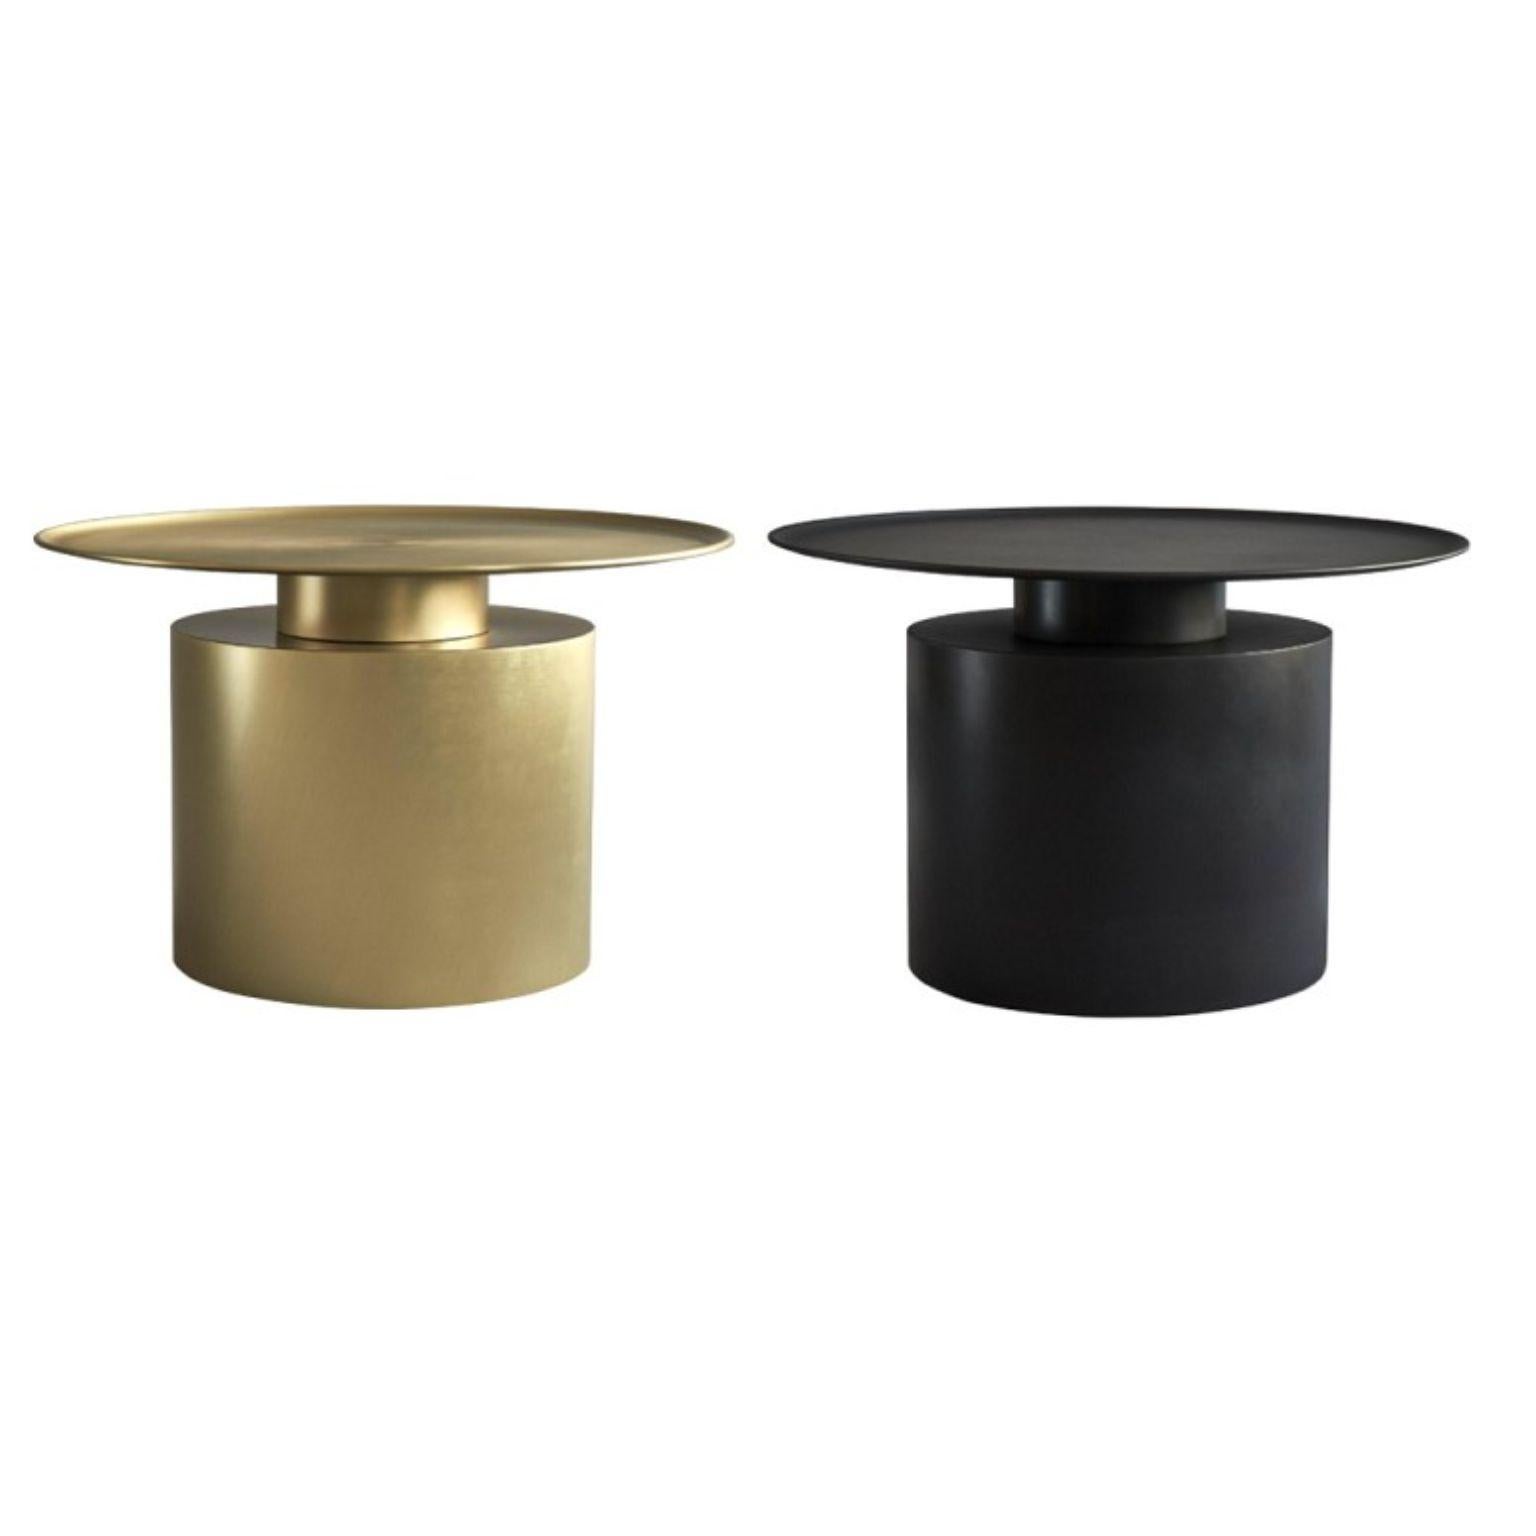 Set of 2 pillar tables Low by 101 Copenhagen
Designed by Kristian Sofus Hansen & Tommy Hyldahl
Dimensions: L 65 / W 65 /H 41 cm
Materials: Plated metal

Pillar is inspired by the rich lustrous use of material in the 1930´s Art Deco movement. The